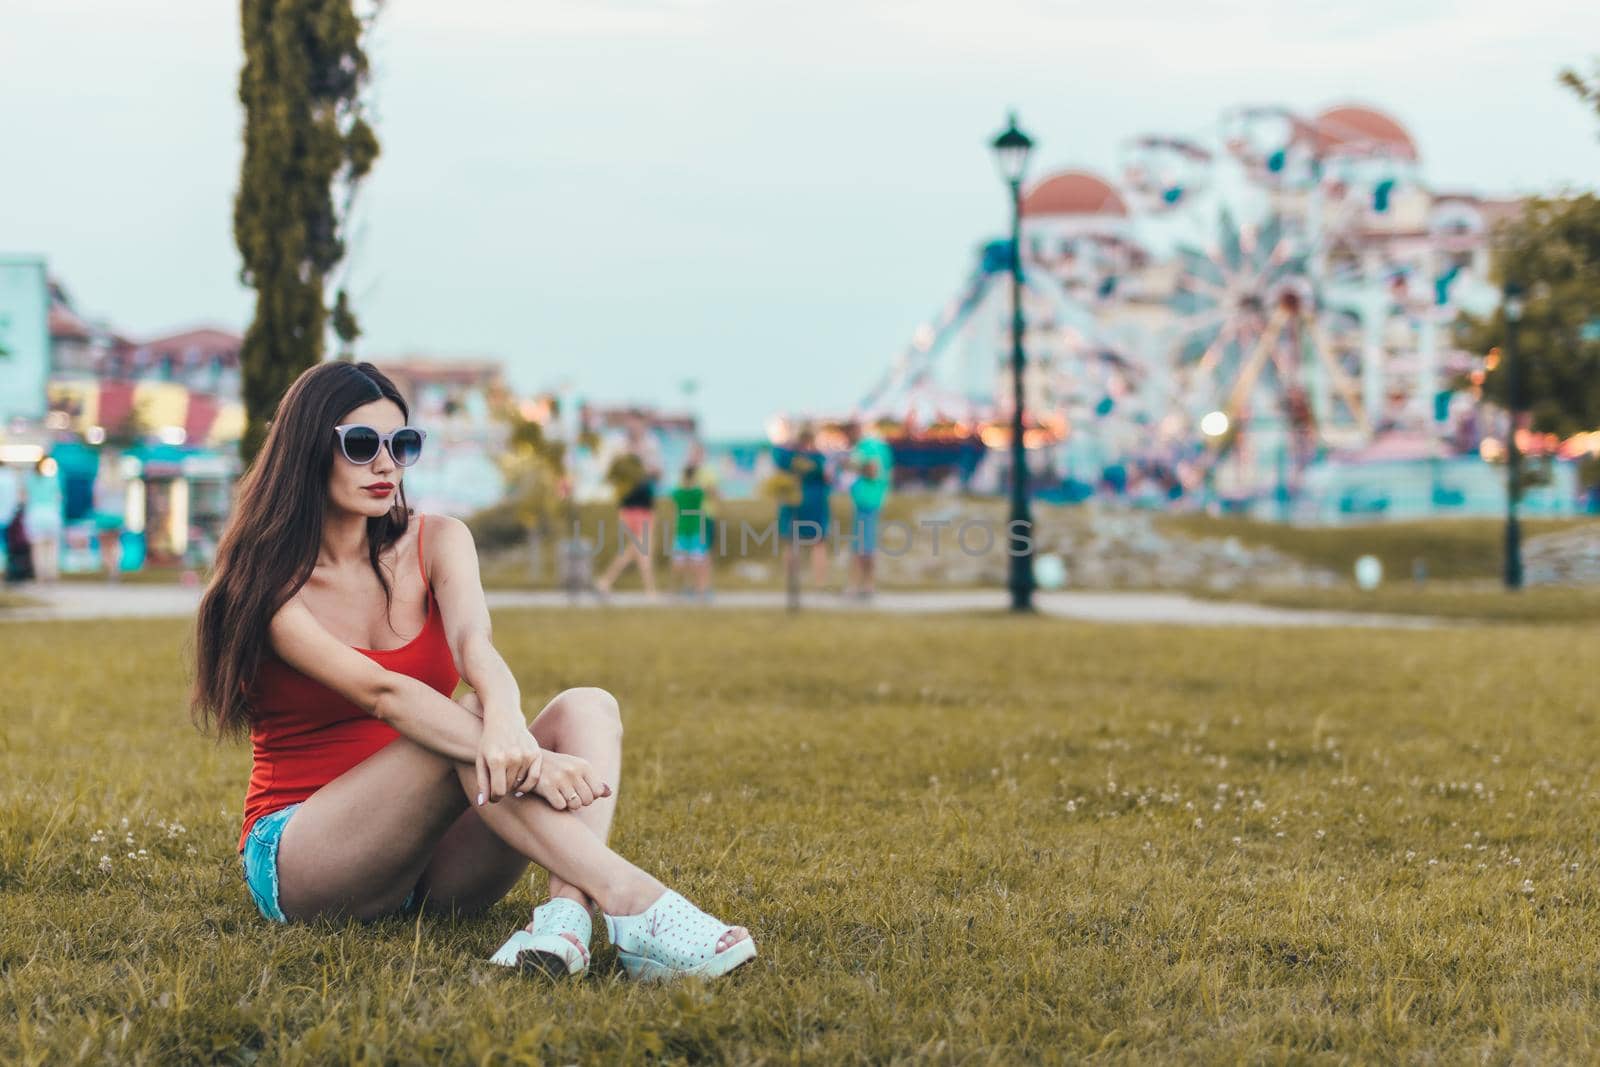 Girl relaxing on the lawn in a city park